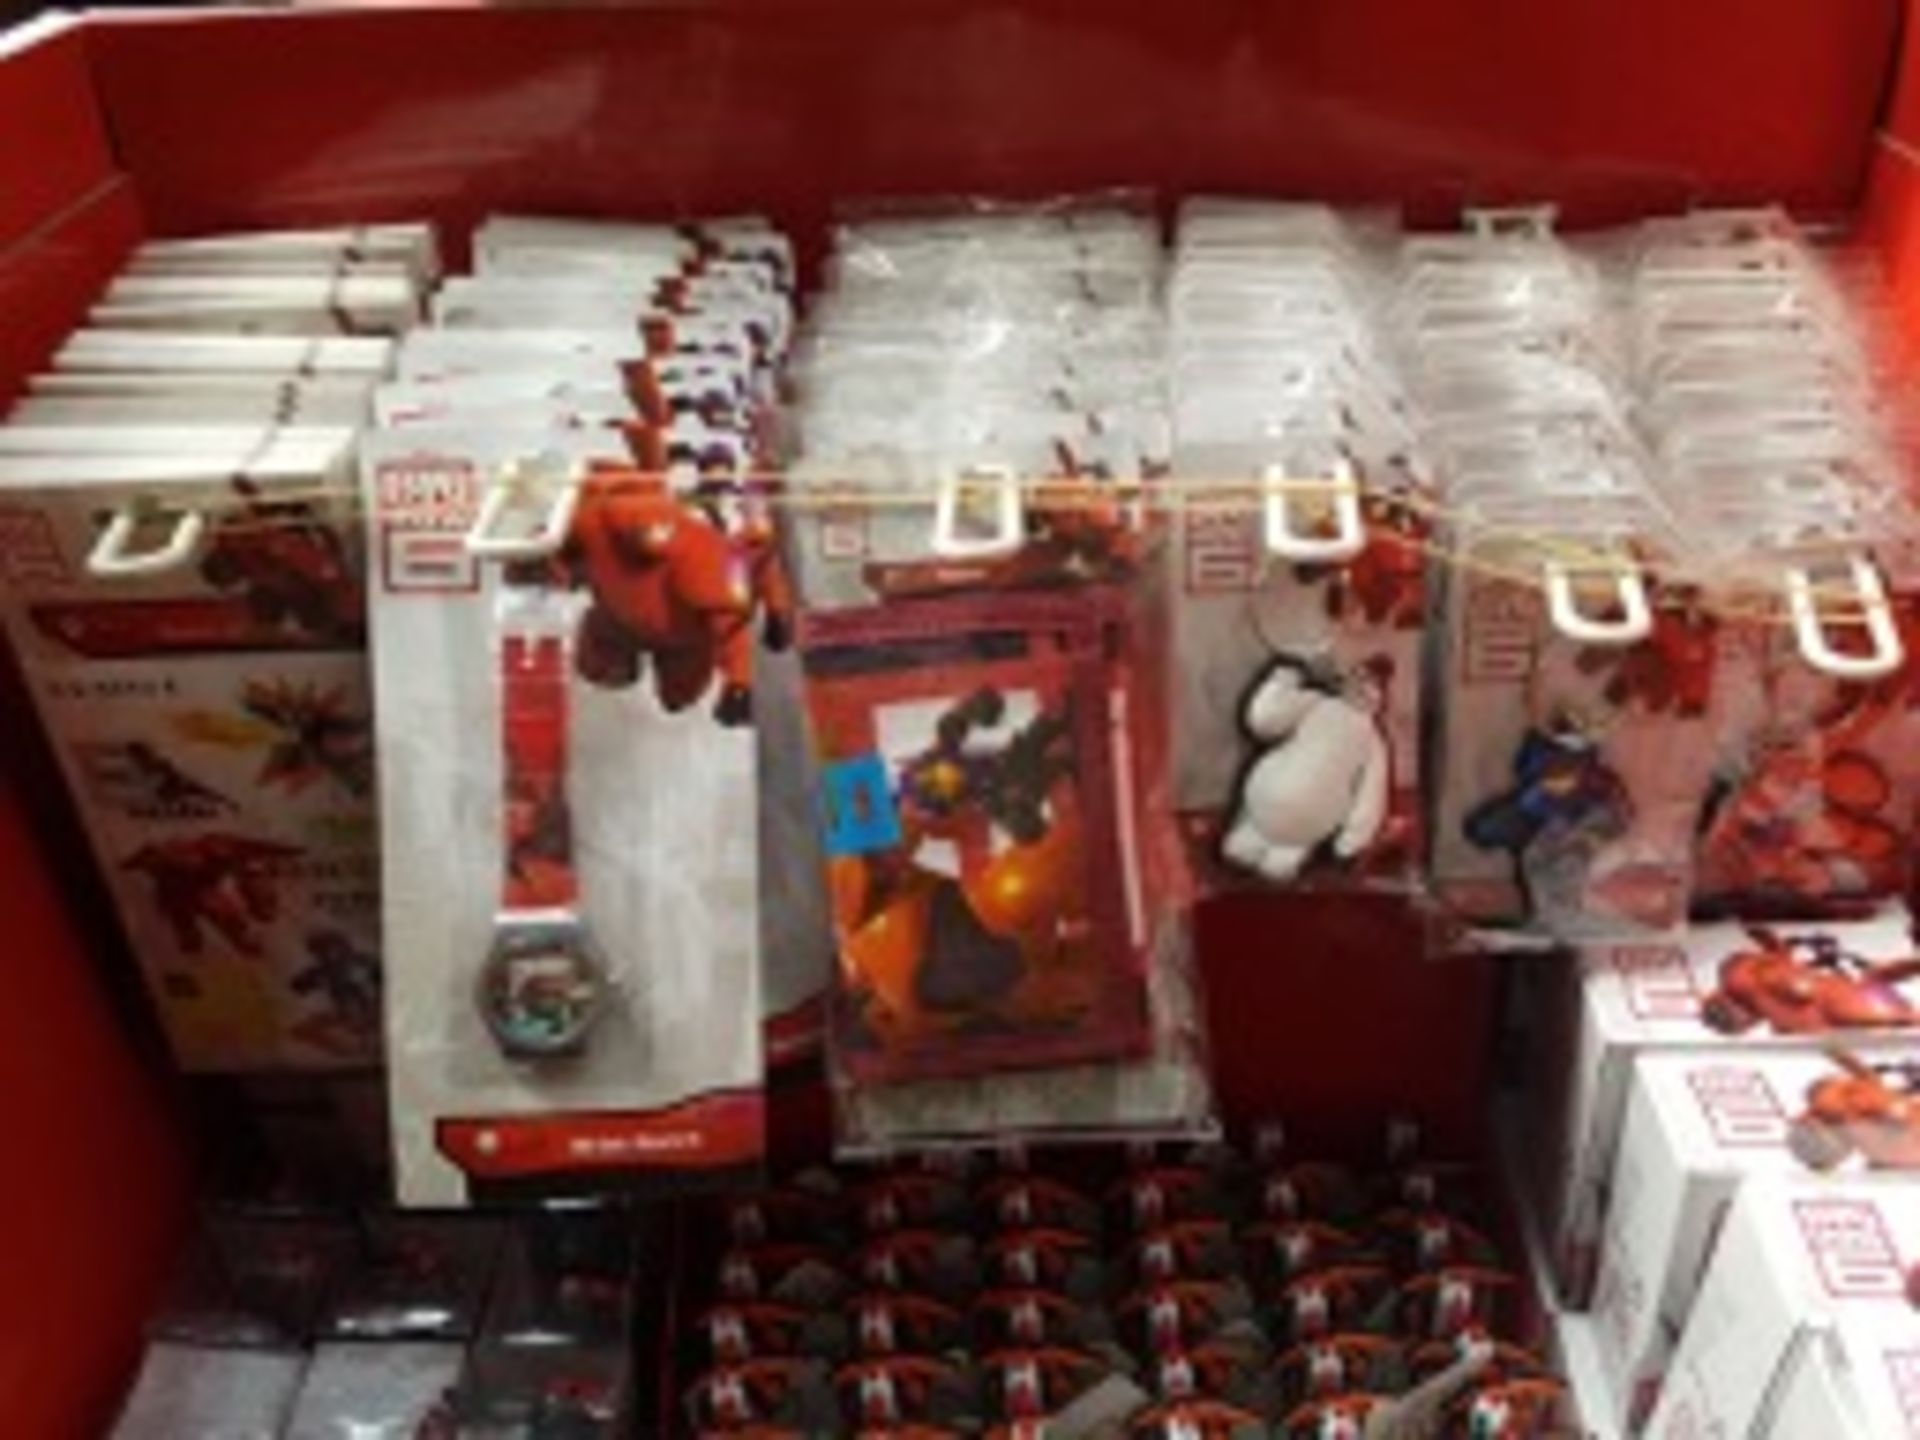 1 x Brand New Big Hero 6 - 328 piece Full Shop Display Unit. Contains: 36 Sticker Sets, 16 - Image 6 of 7